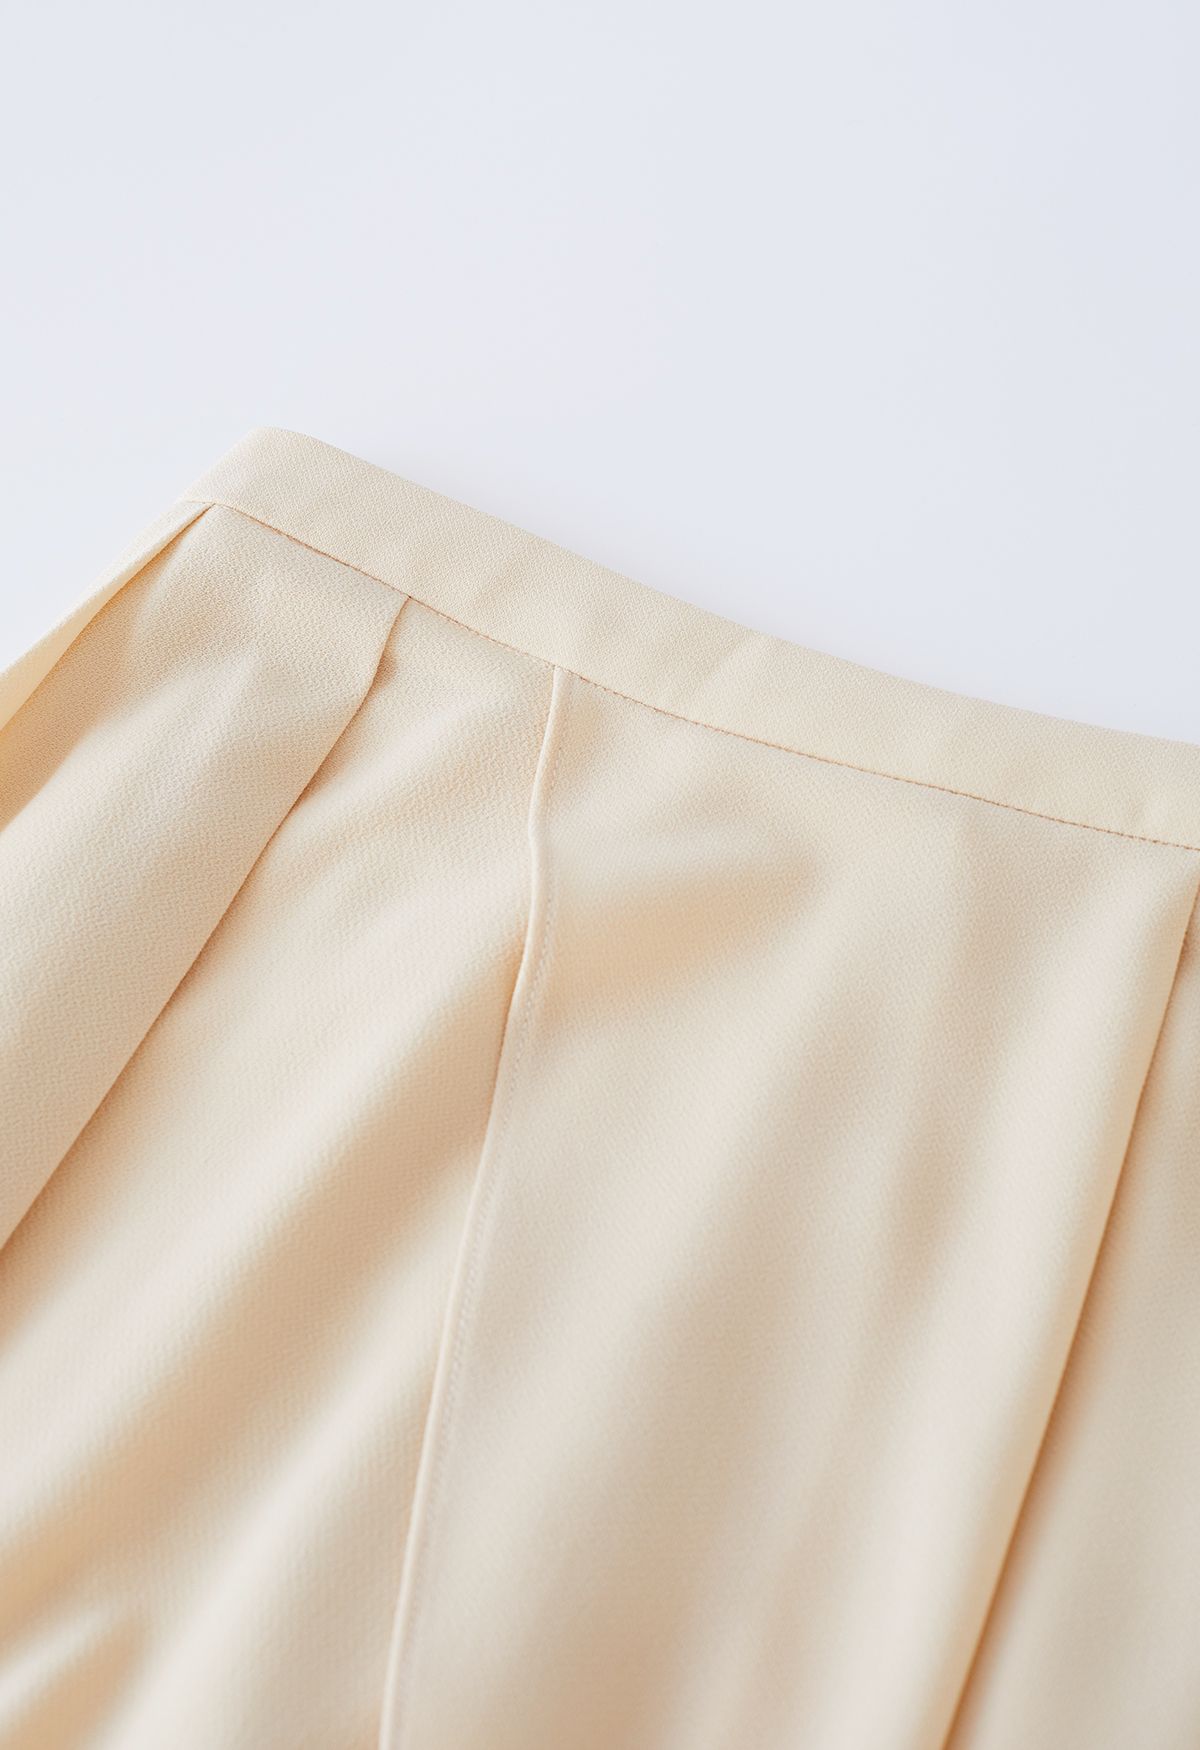 Tulip Pleated Ruched Maxi Skirt in Cream - Retro, Indie and Unique Fashion